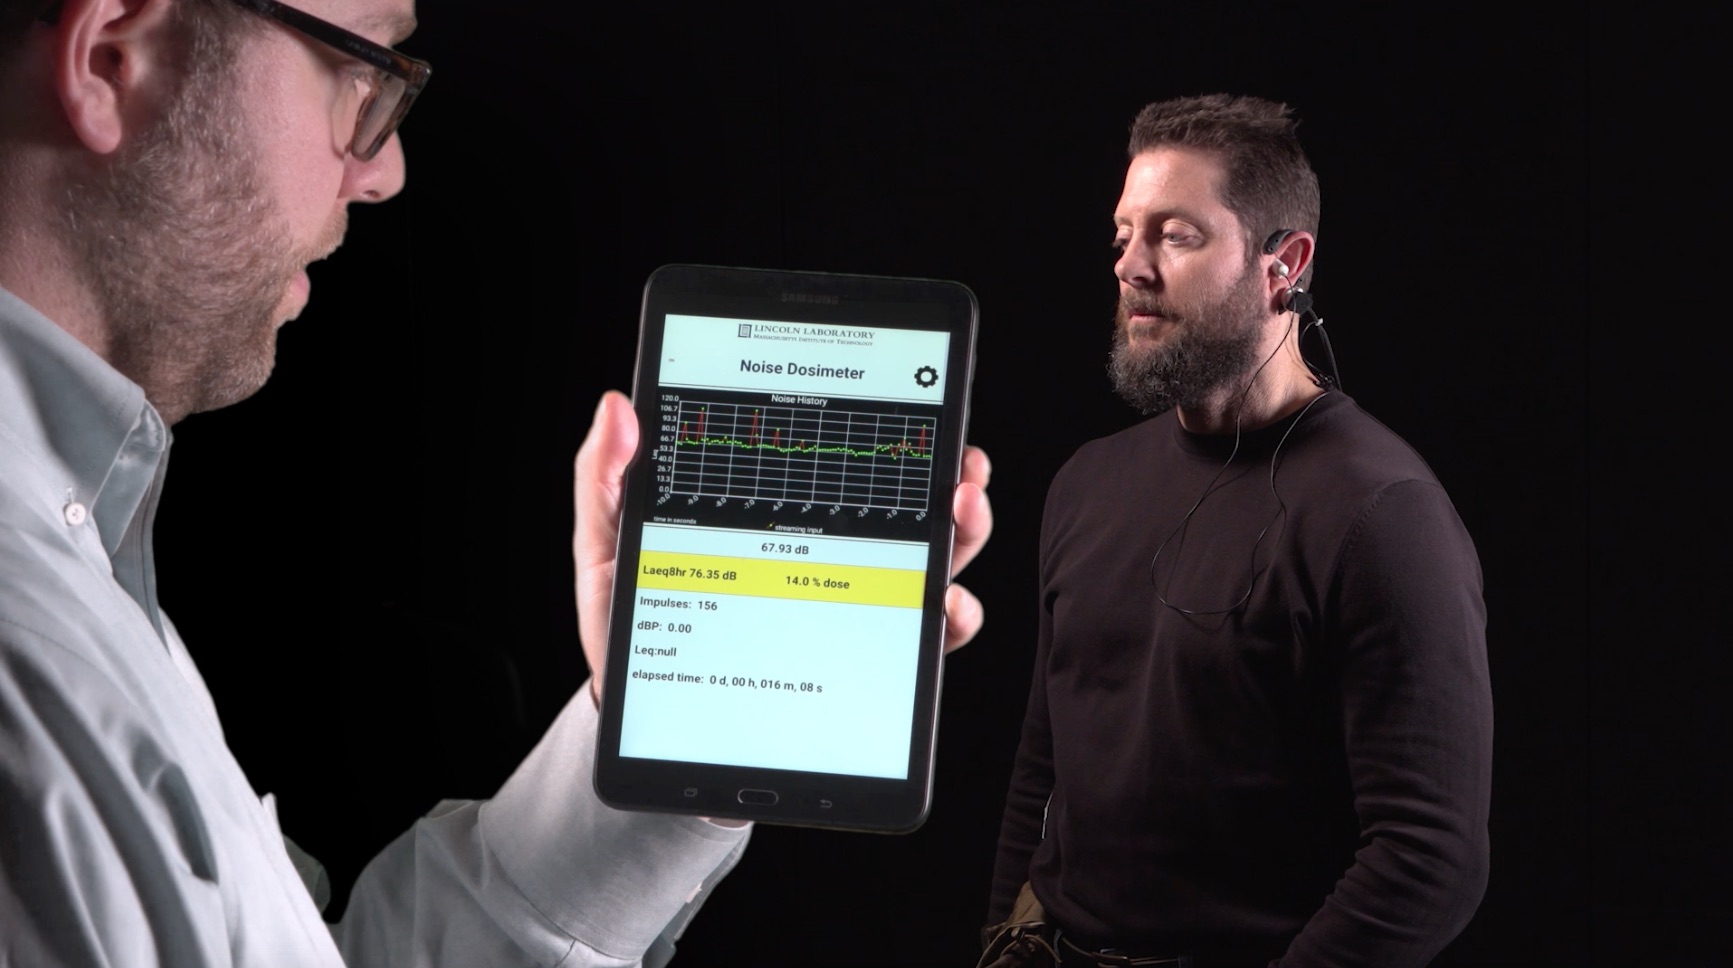 A researcher holds a tablet showing the MNOISE app while a user wears the MNOSIE earpiece.